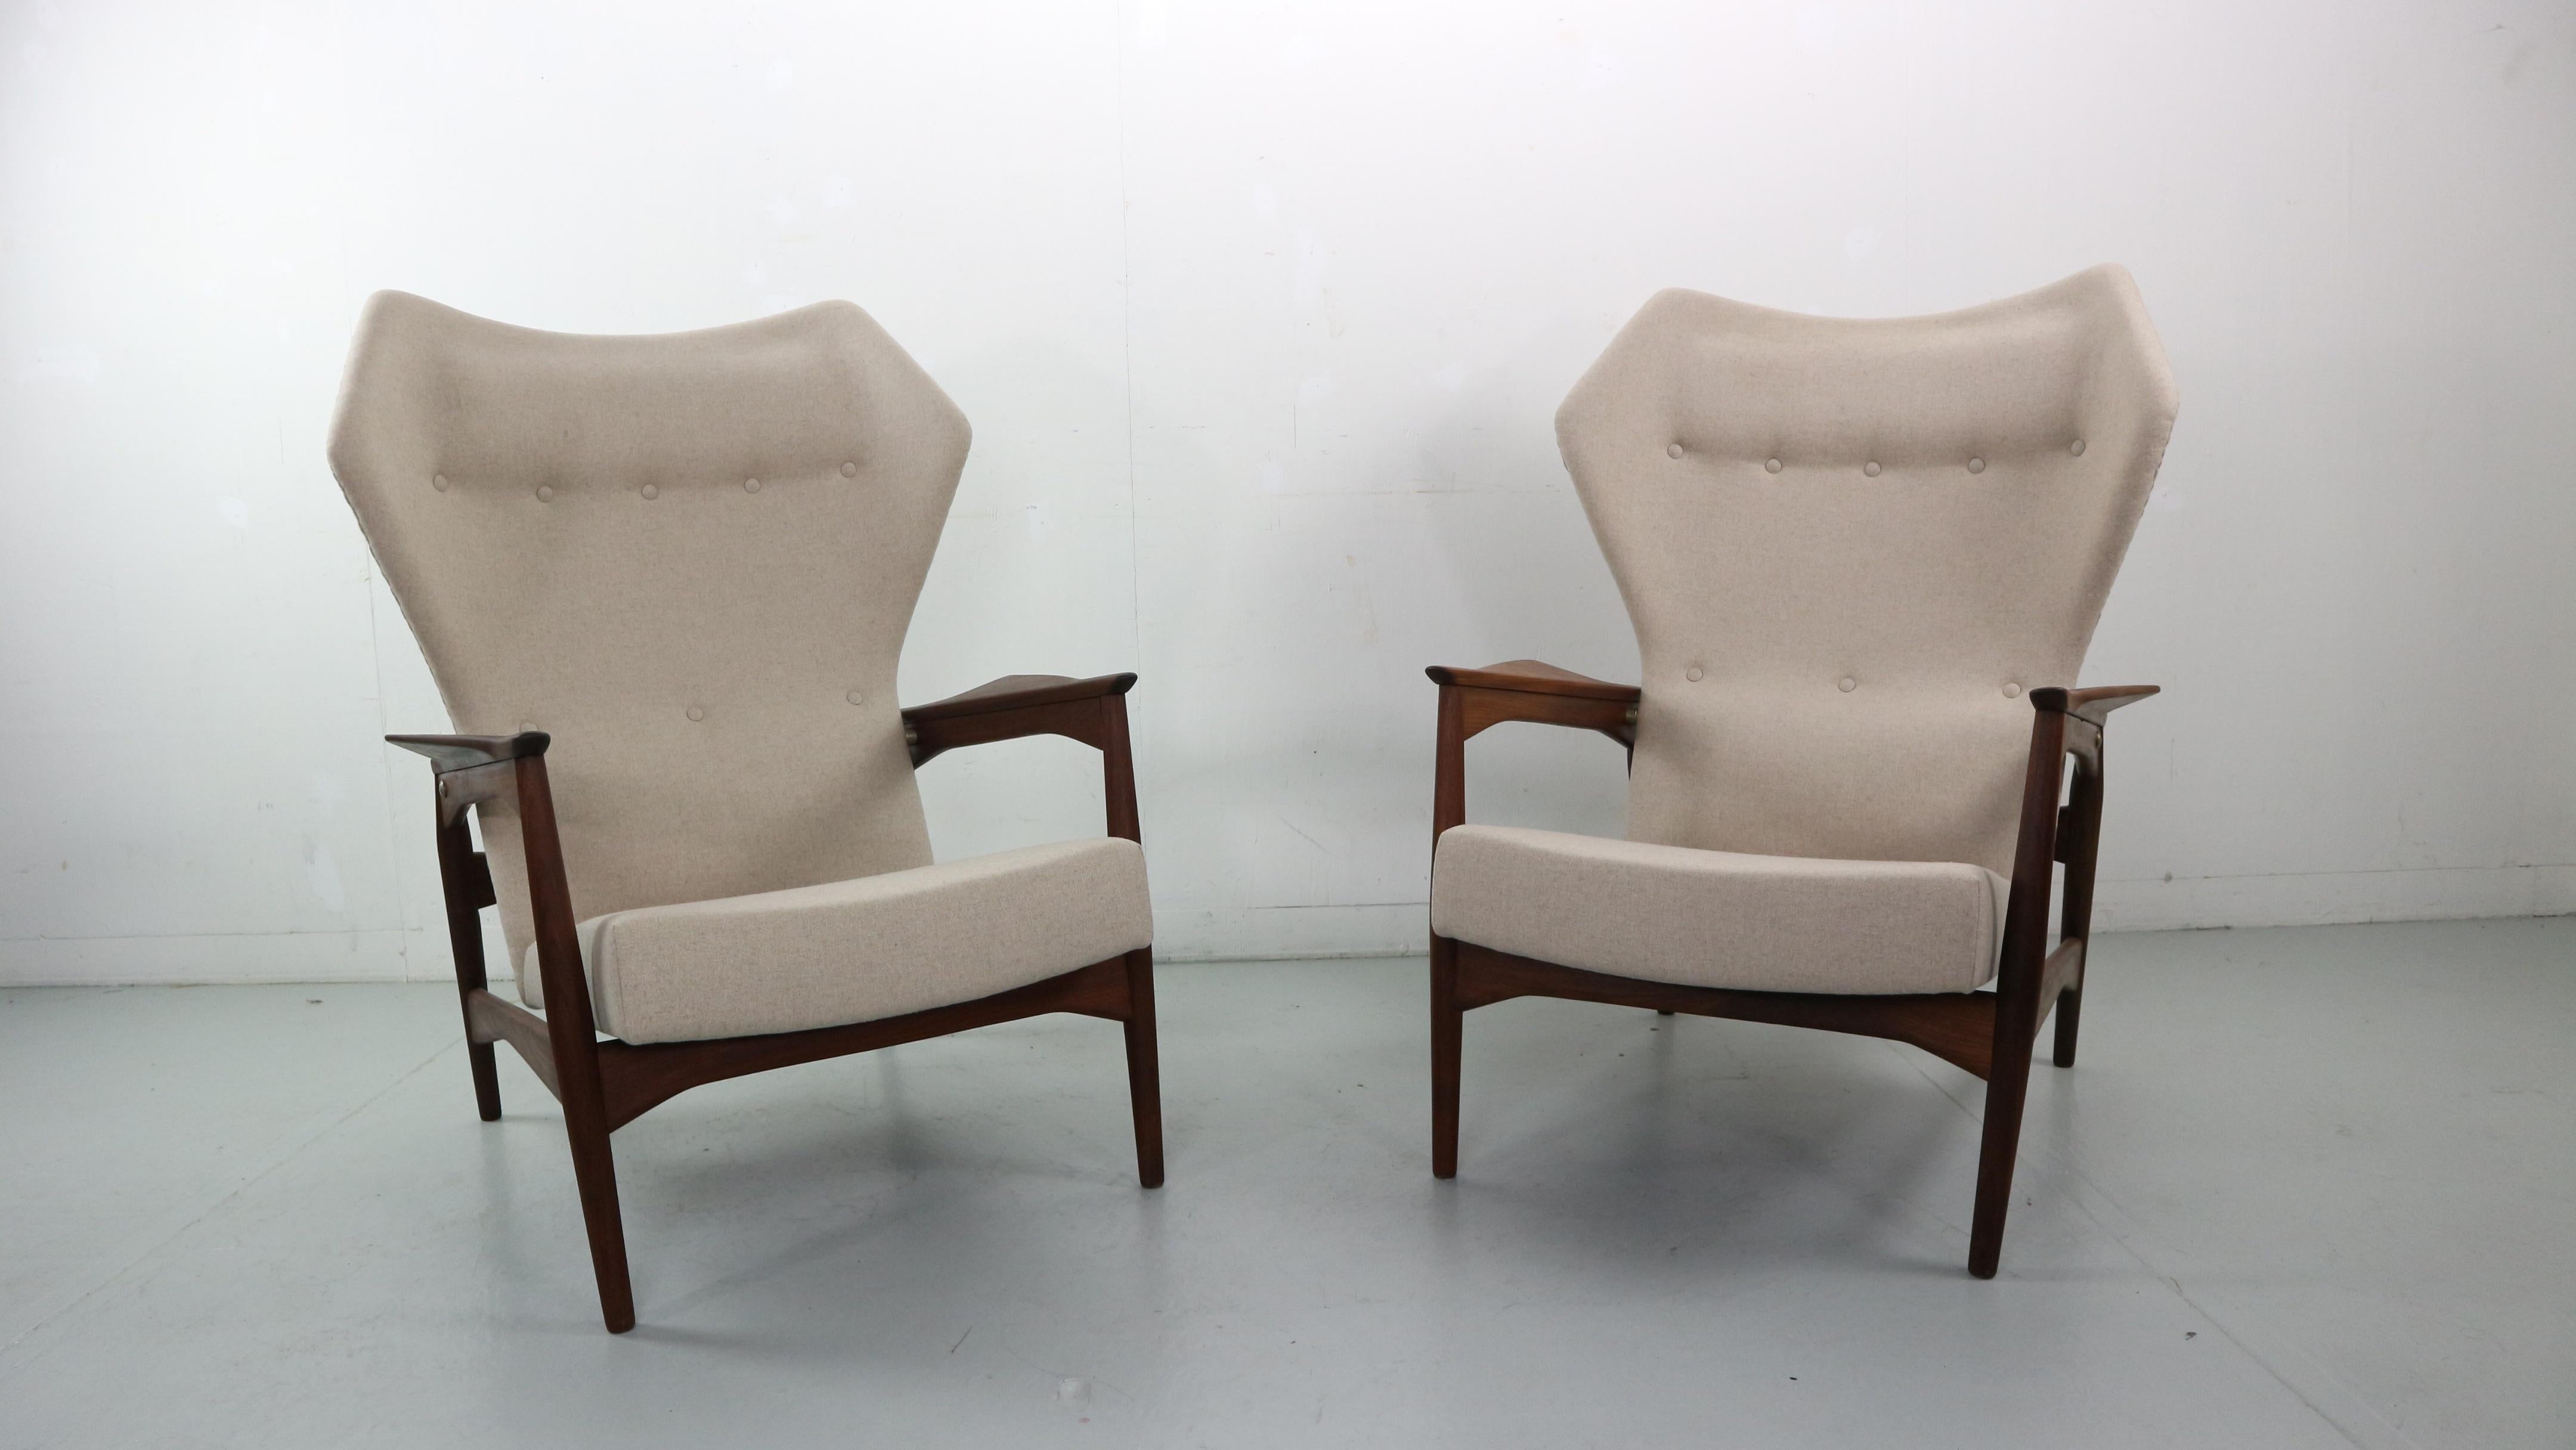 Set of two wingback lounge chairs designed by Ib Kofod-Larsen in 1954. The chairs are reclinable and it can be adjusted in three positions, as seen in the pictures. The chairs have been reupholstered in a natural wool (shiitake) beige color, perfect